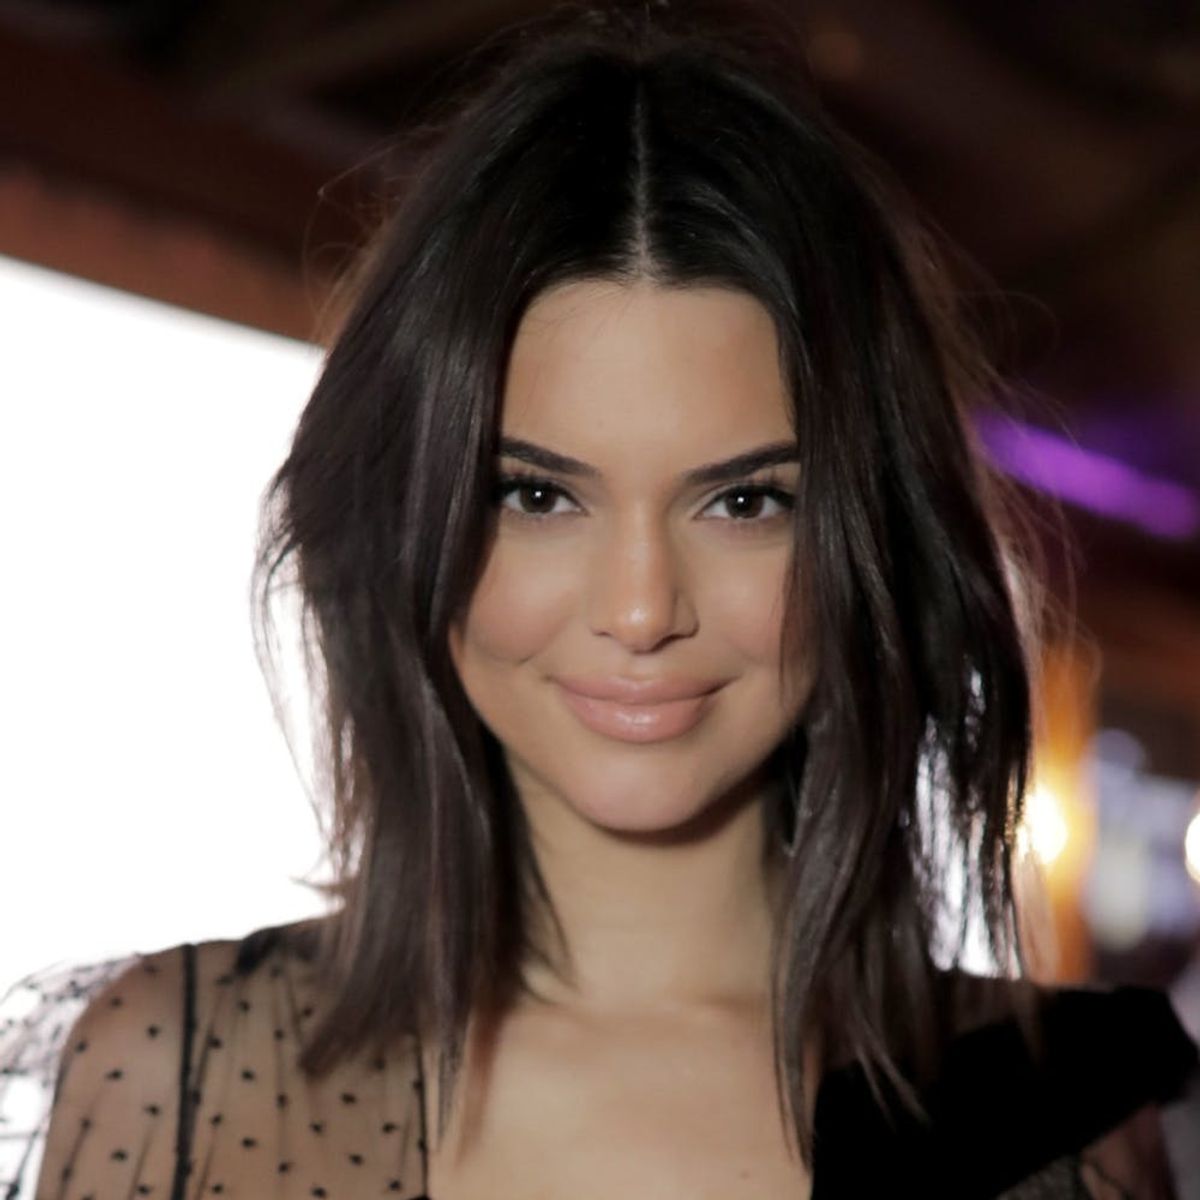 Kendall Jenner Just Shut Down Those ’90s Supermodel Comparisons Once and for All